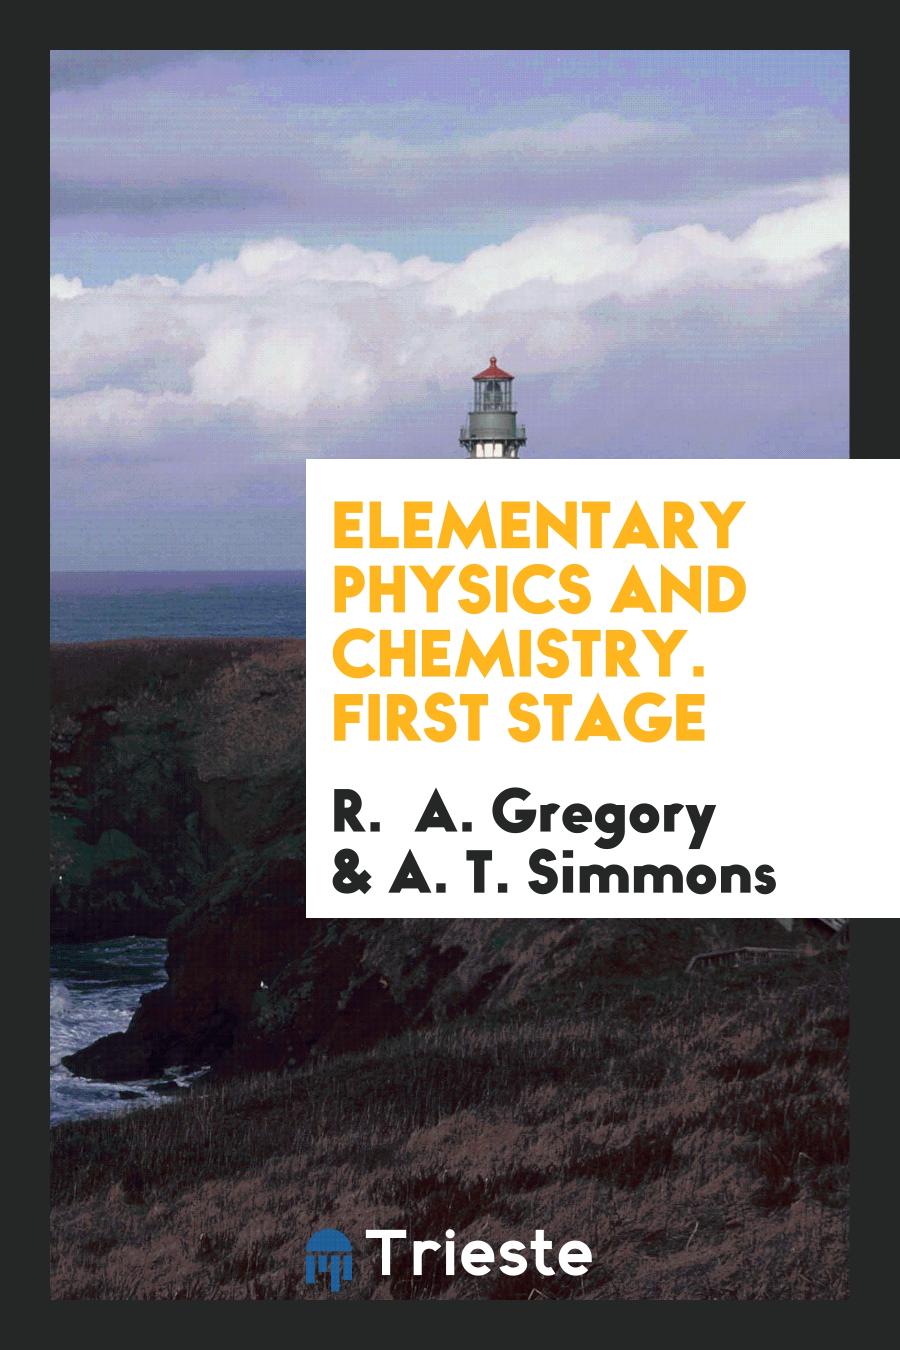 Elementary Physics and Chemistry. First Stage